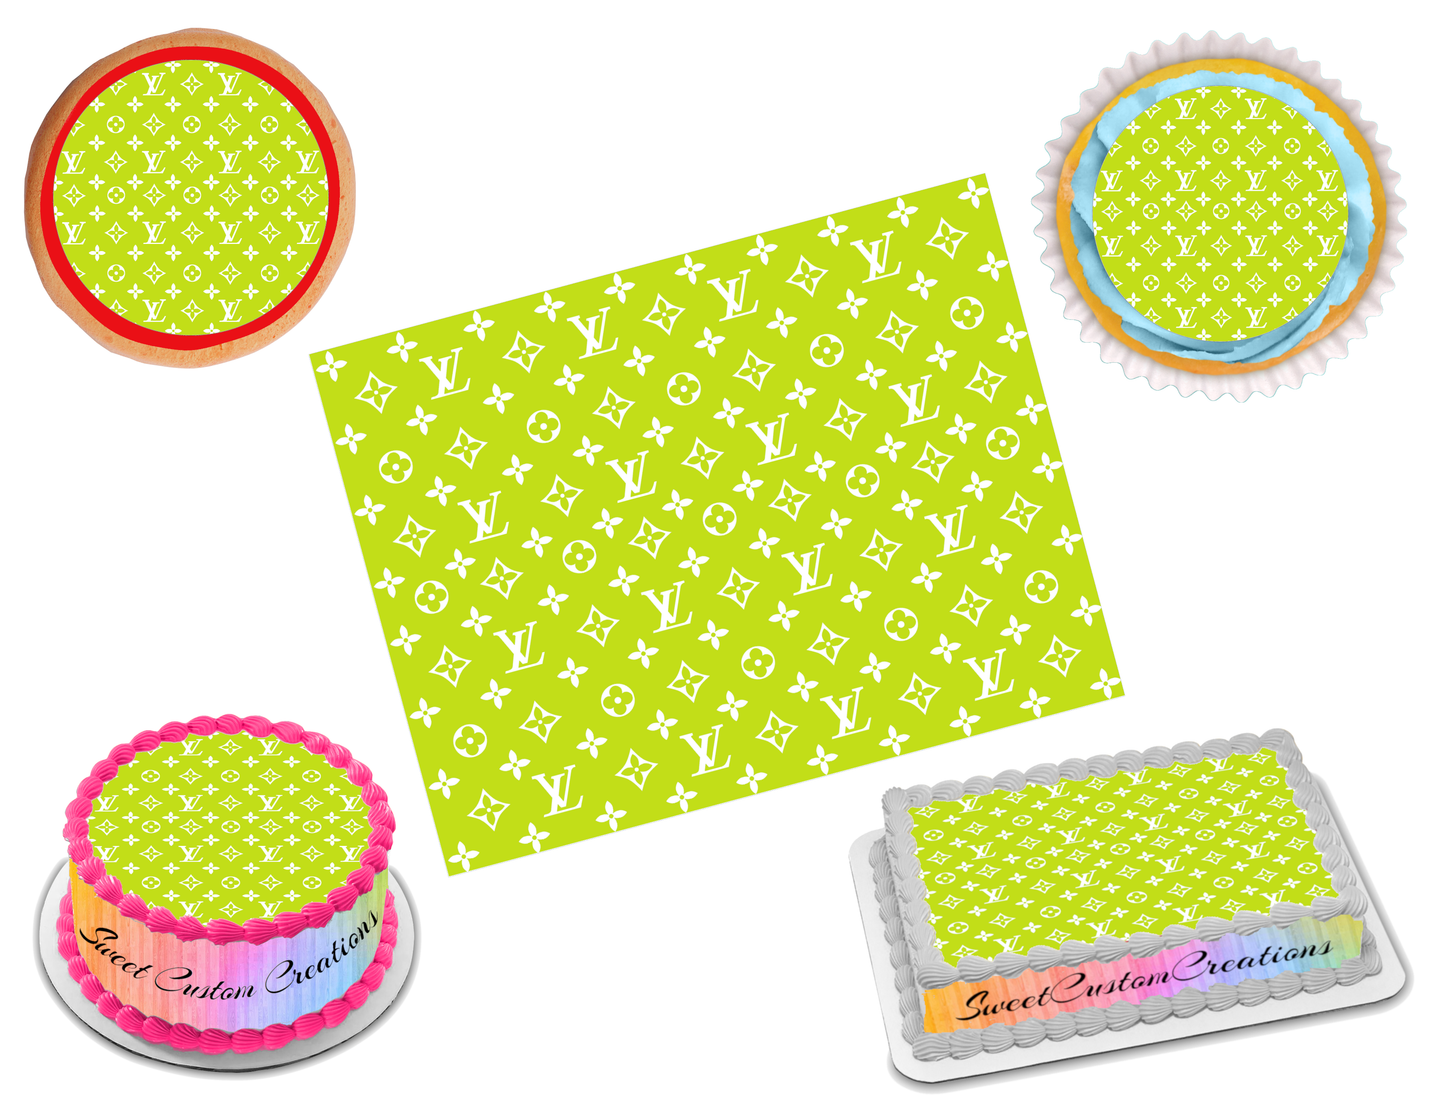 Louis Vuitton Neon Lime Green White Edible Image Frosting Sheet #55 (7 –  Sweet Custom Creations